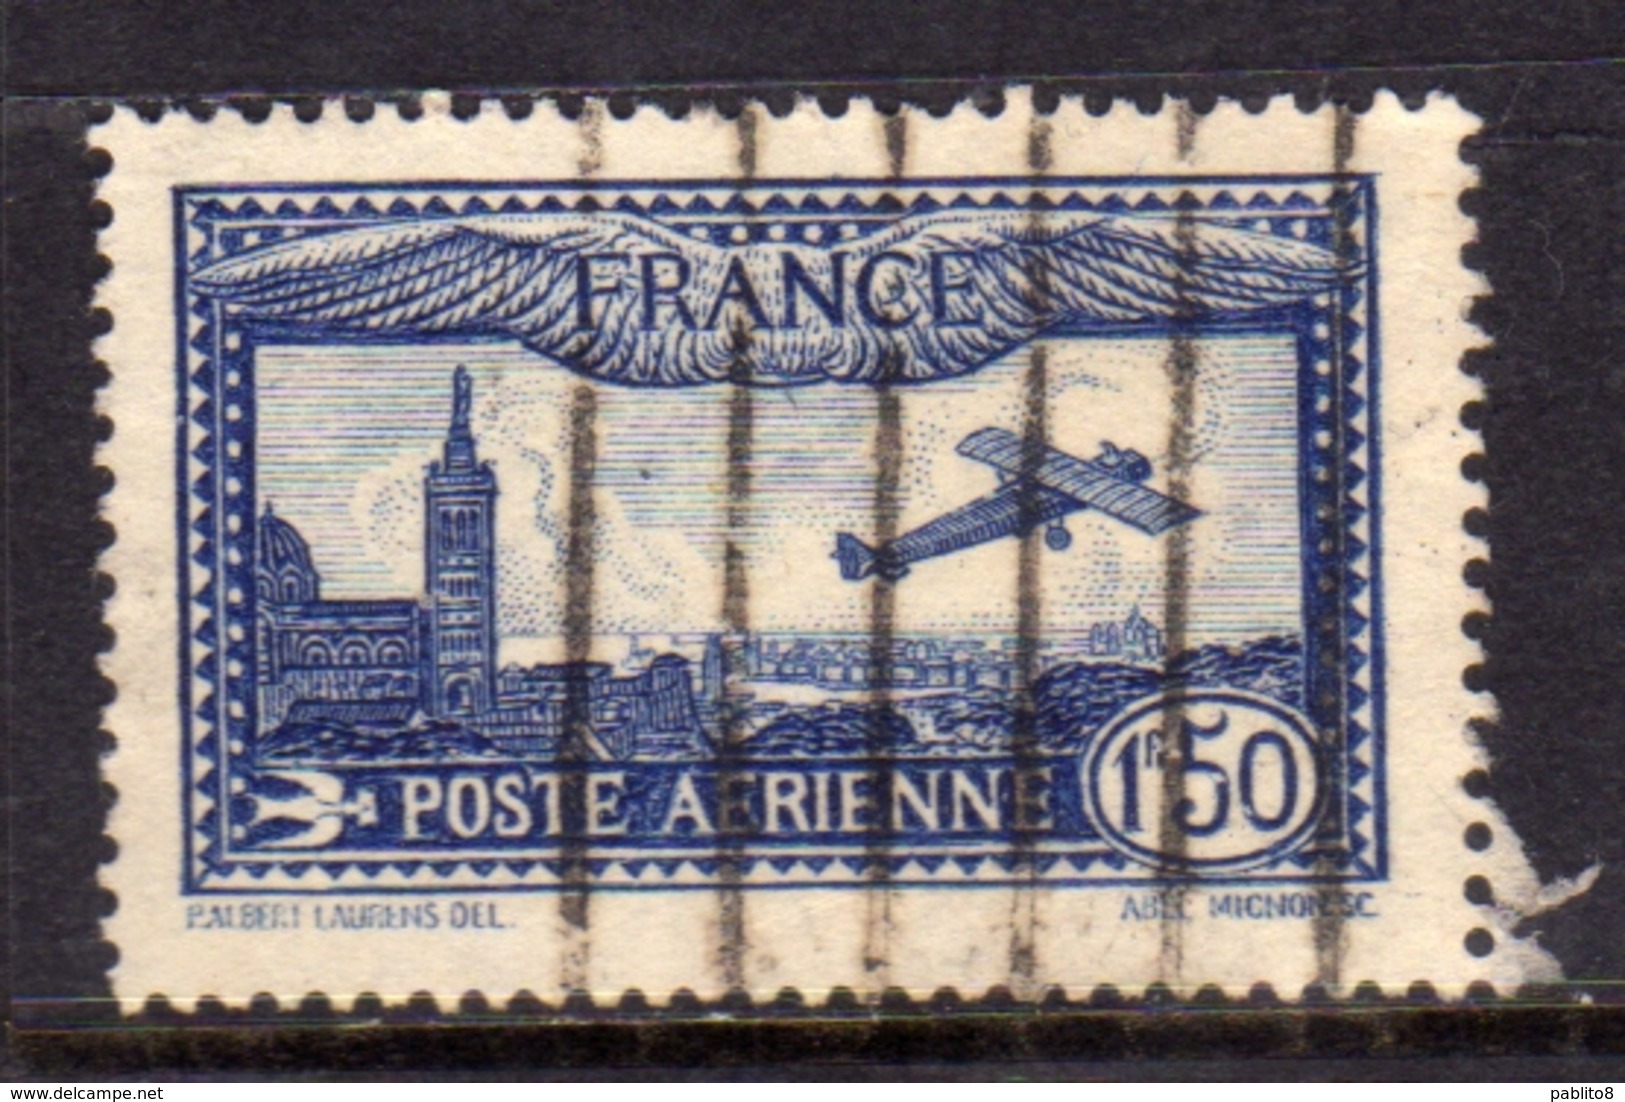 FRANCE FRANCIA 1930 1931 POSTE AERIENNE AIR MAIL AEREA VIEW OF MARSEILLE VUE NOTRE DAME LEFTE 1.50f  OBLITERE' USED - 1927-1959 Usati